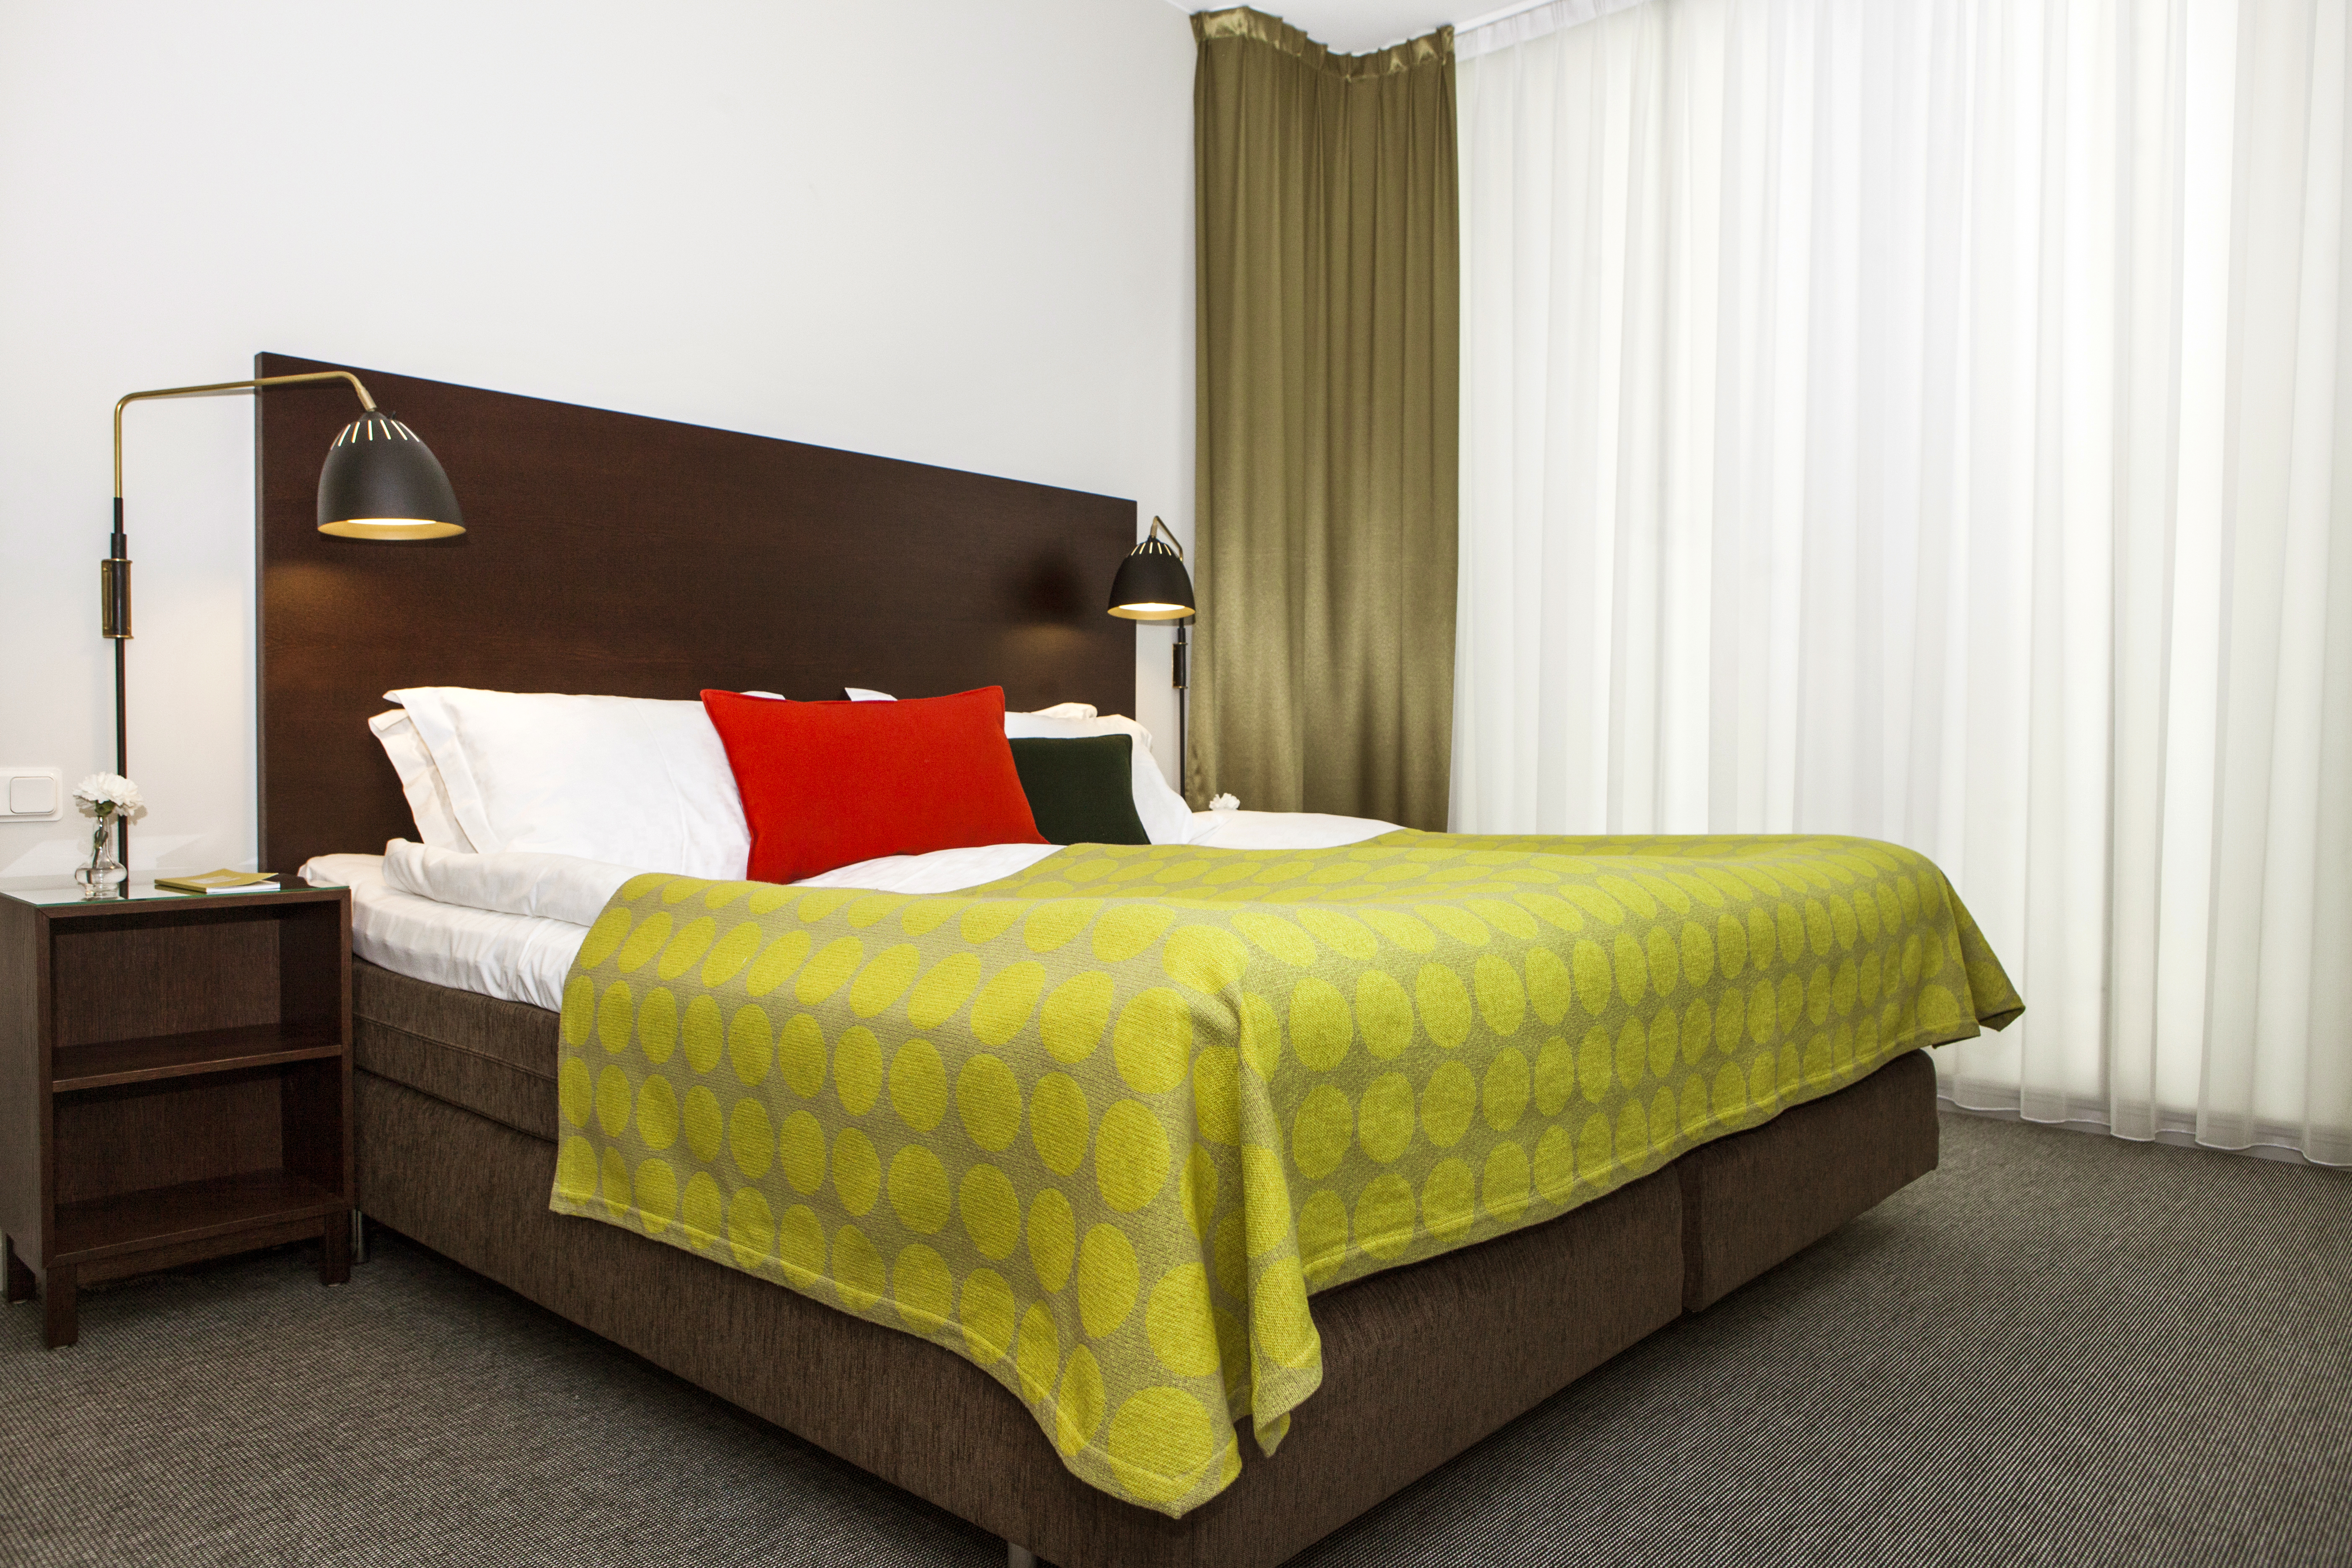 Hotel room with bed, large headboard and bedside lamps